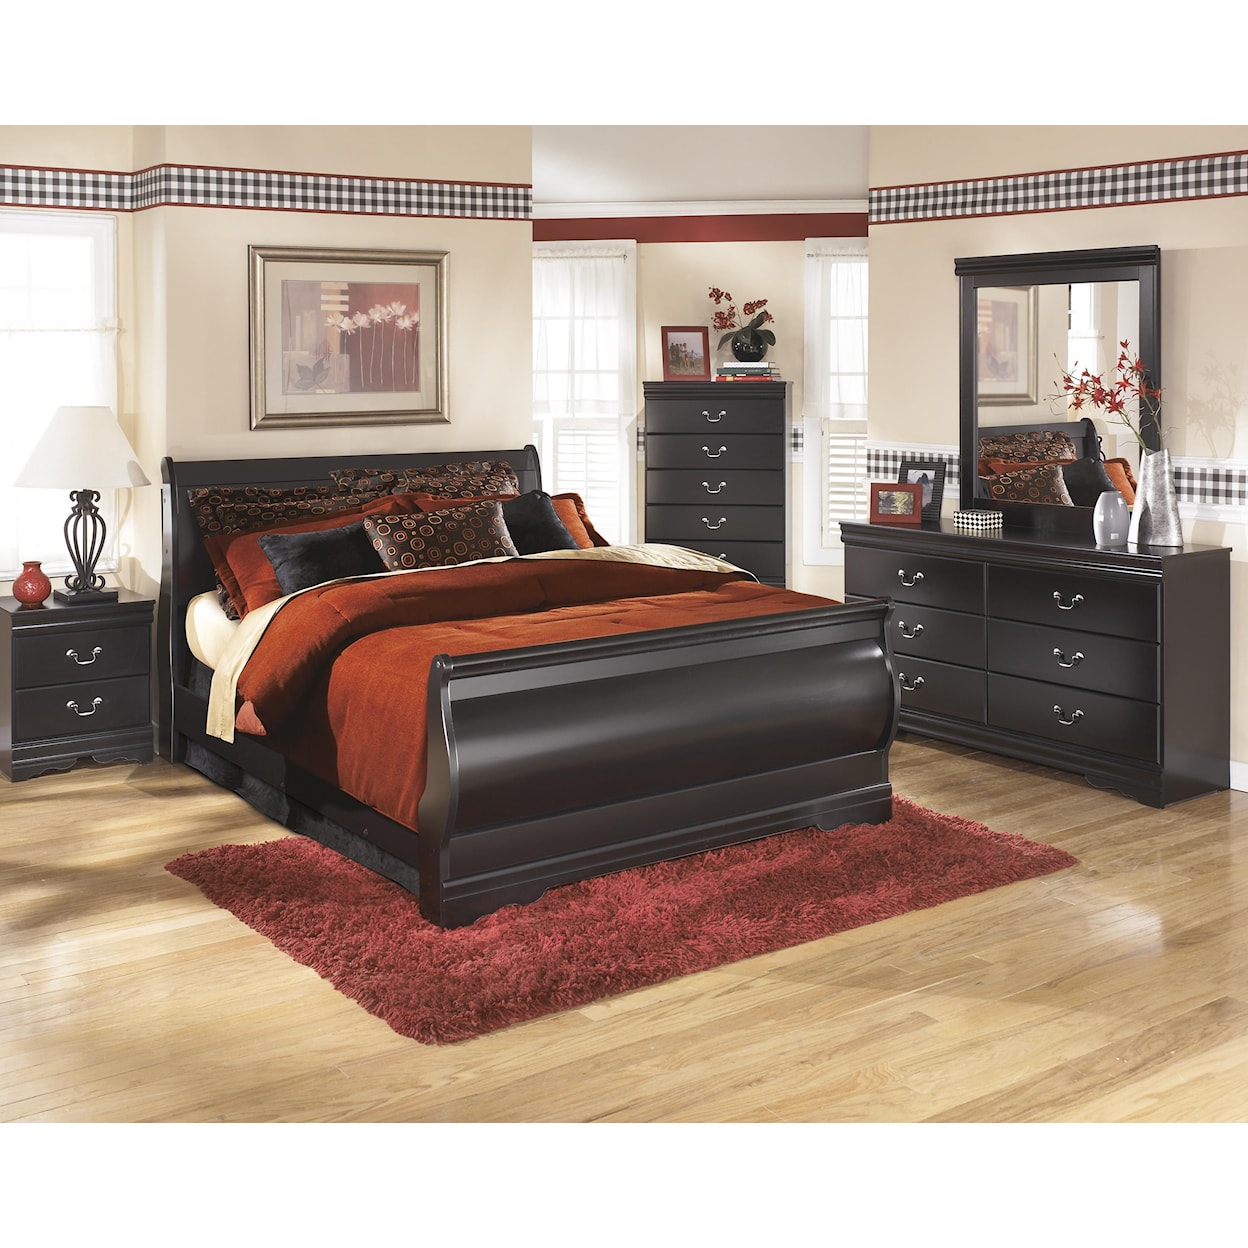 Signature Design by Ashley Huey Vineyard 7pc Queen Bedroom Group